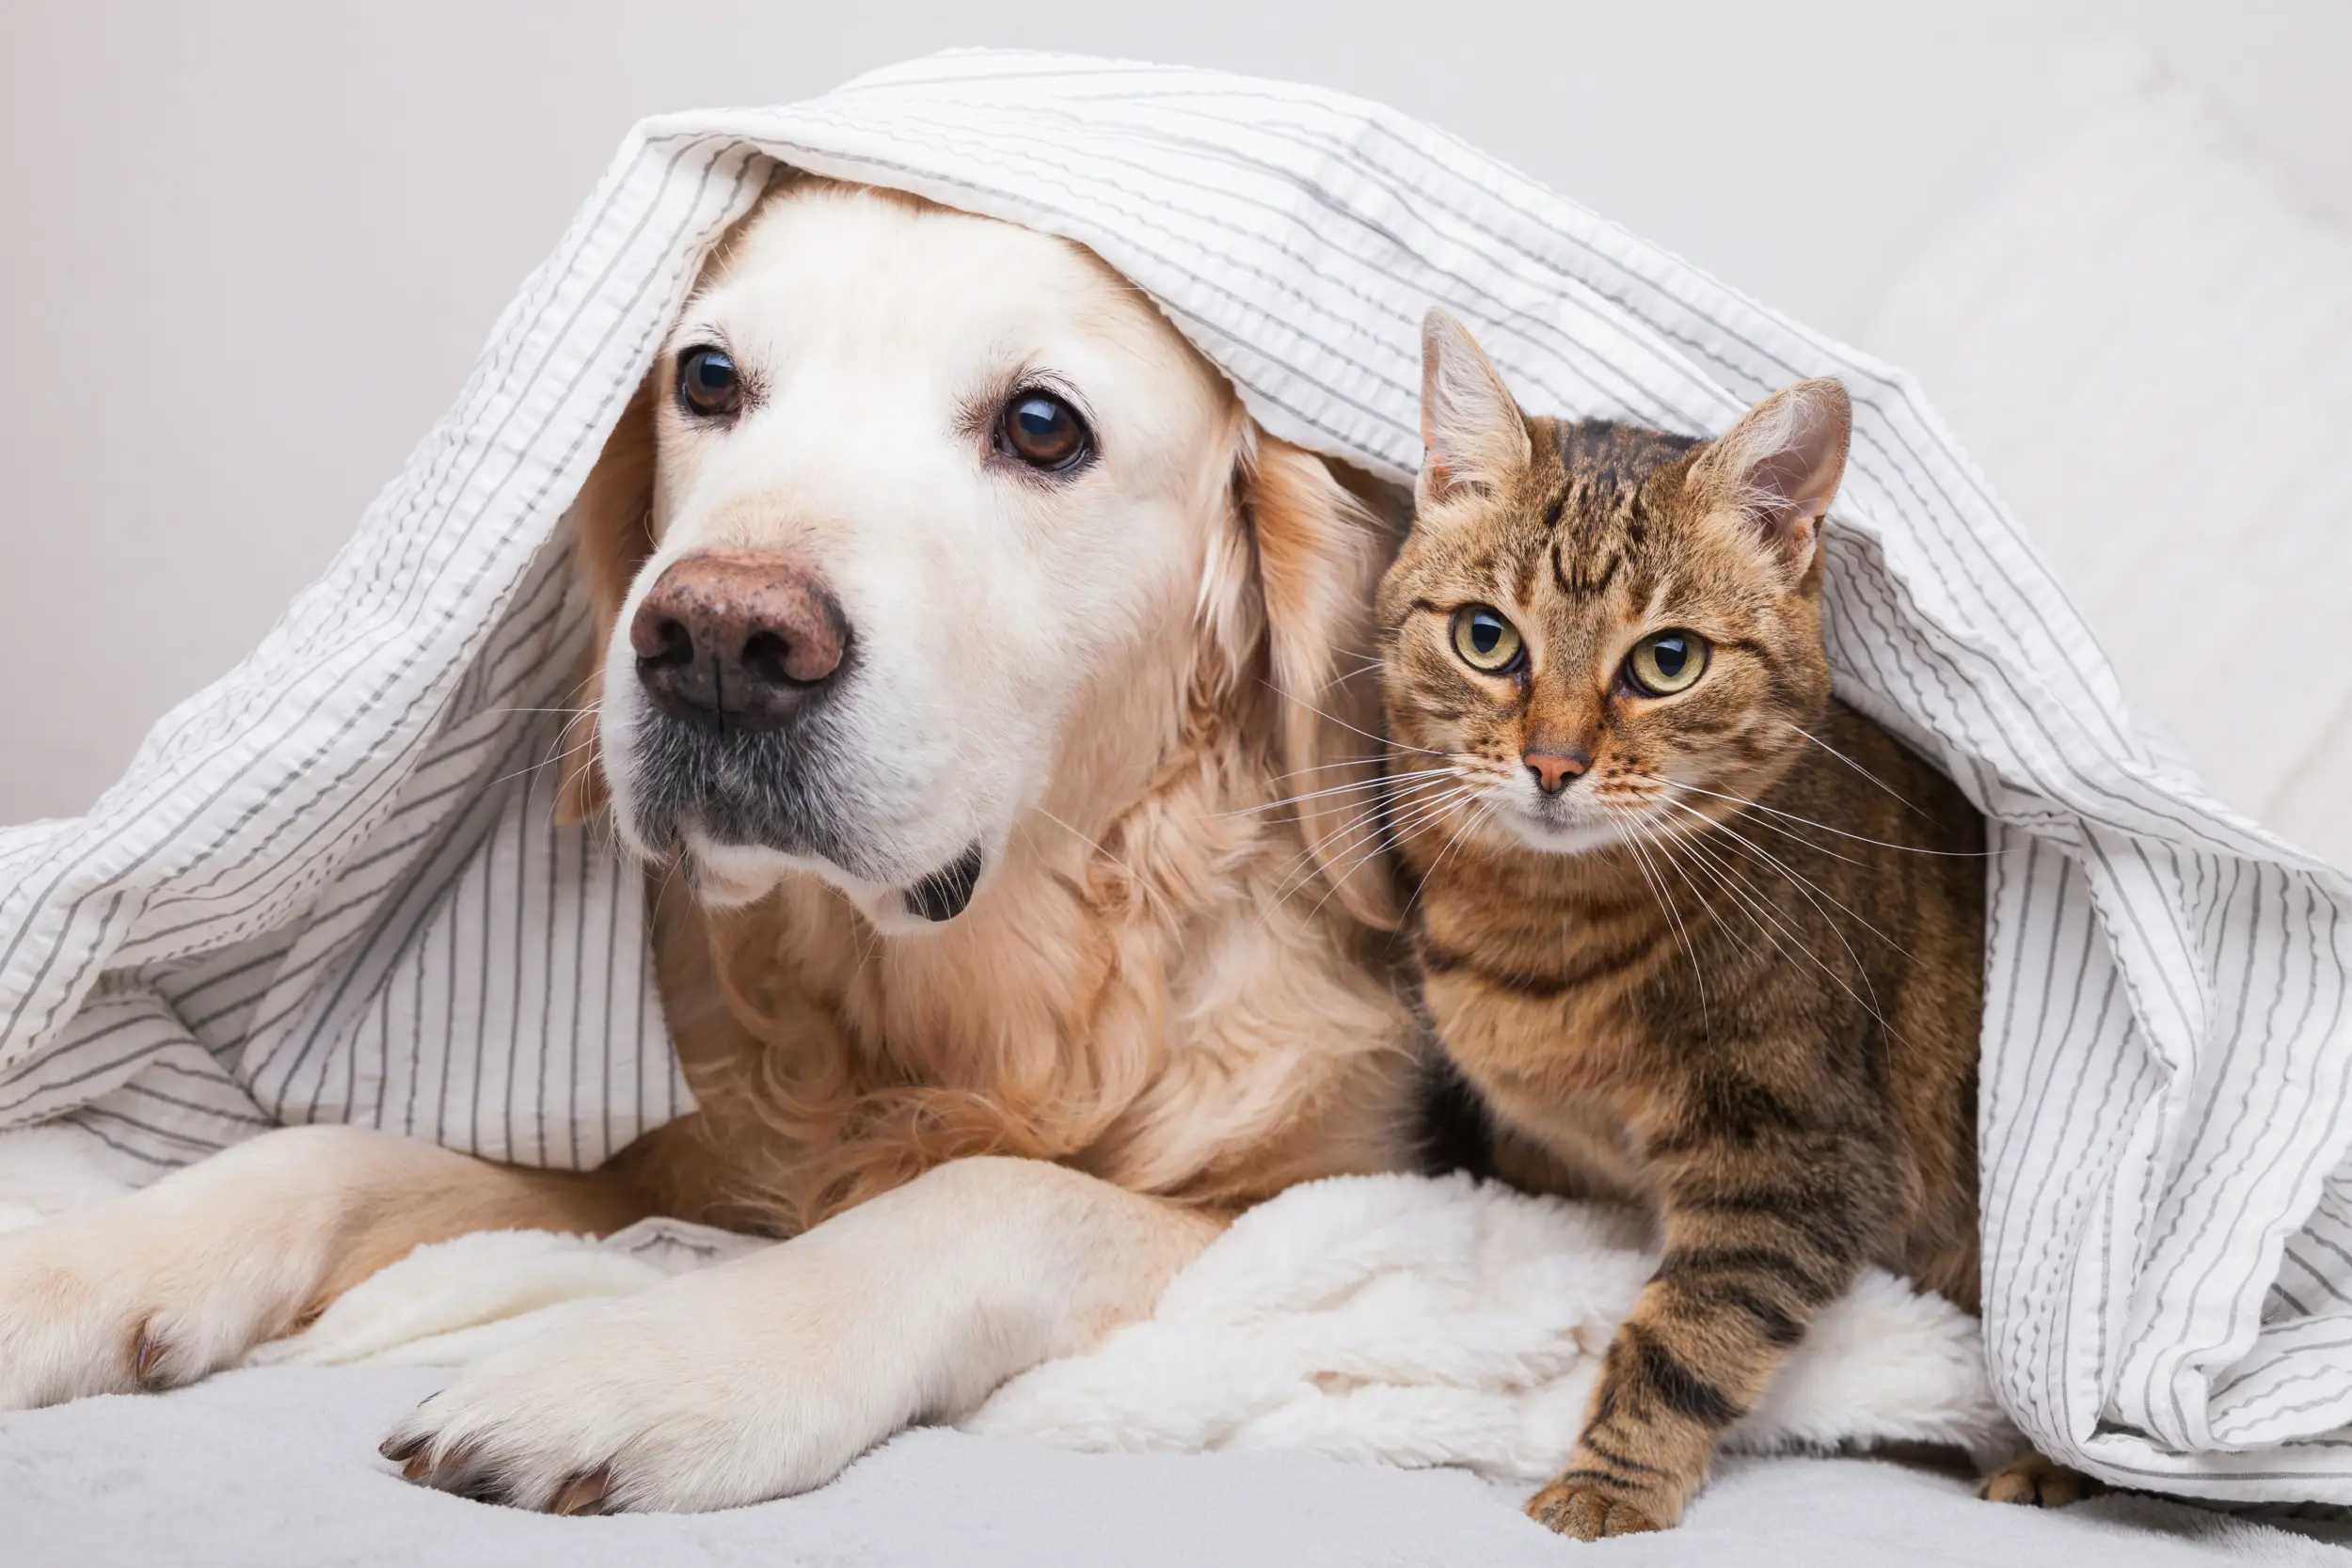 A Heartwarming Story of a Cat and Dog's Friendship at a Rescue Shelter